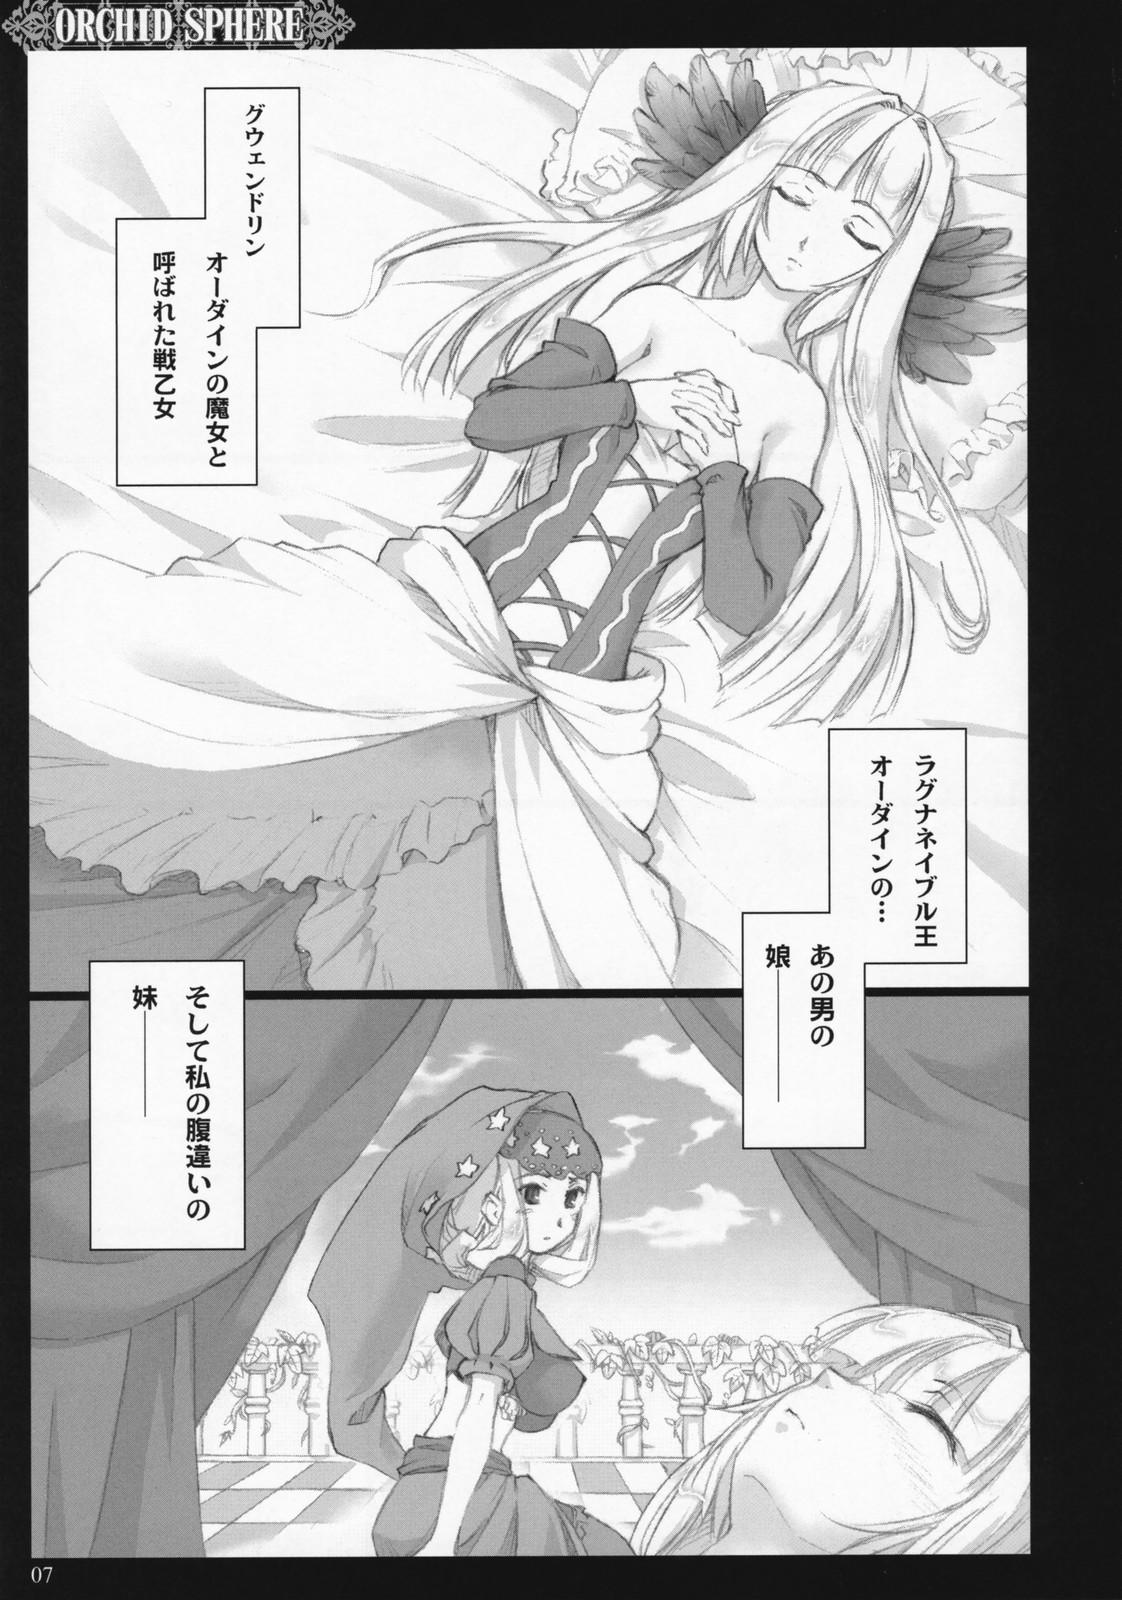 Gorda Orchid Sphere - Odin sphere Amateur - Page 6